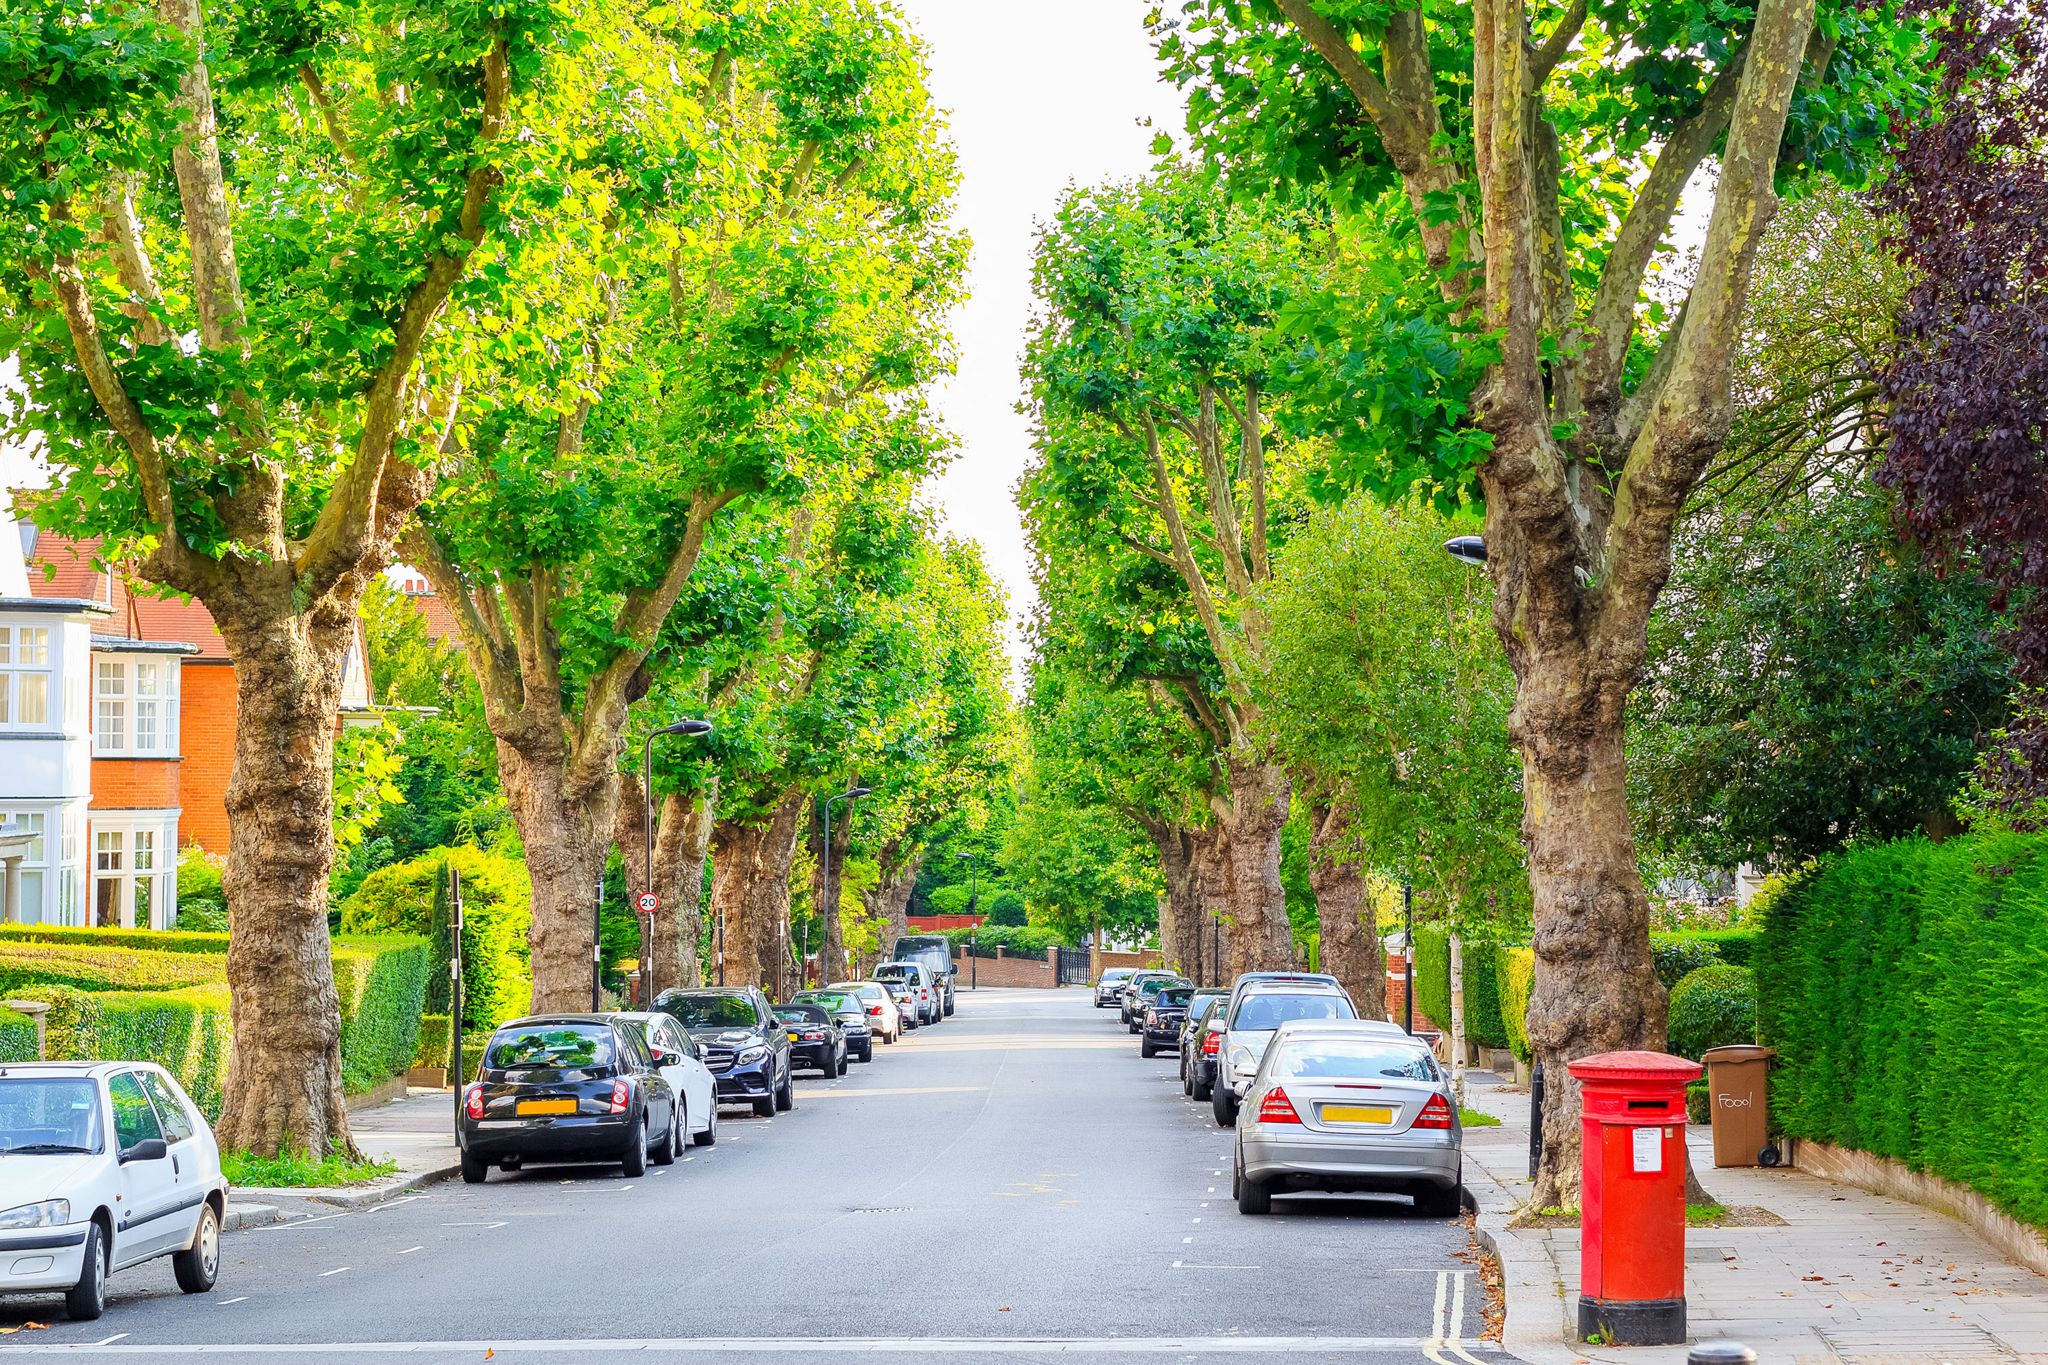 A photo of a tree-lined street in camden north London